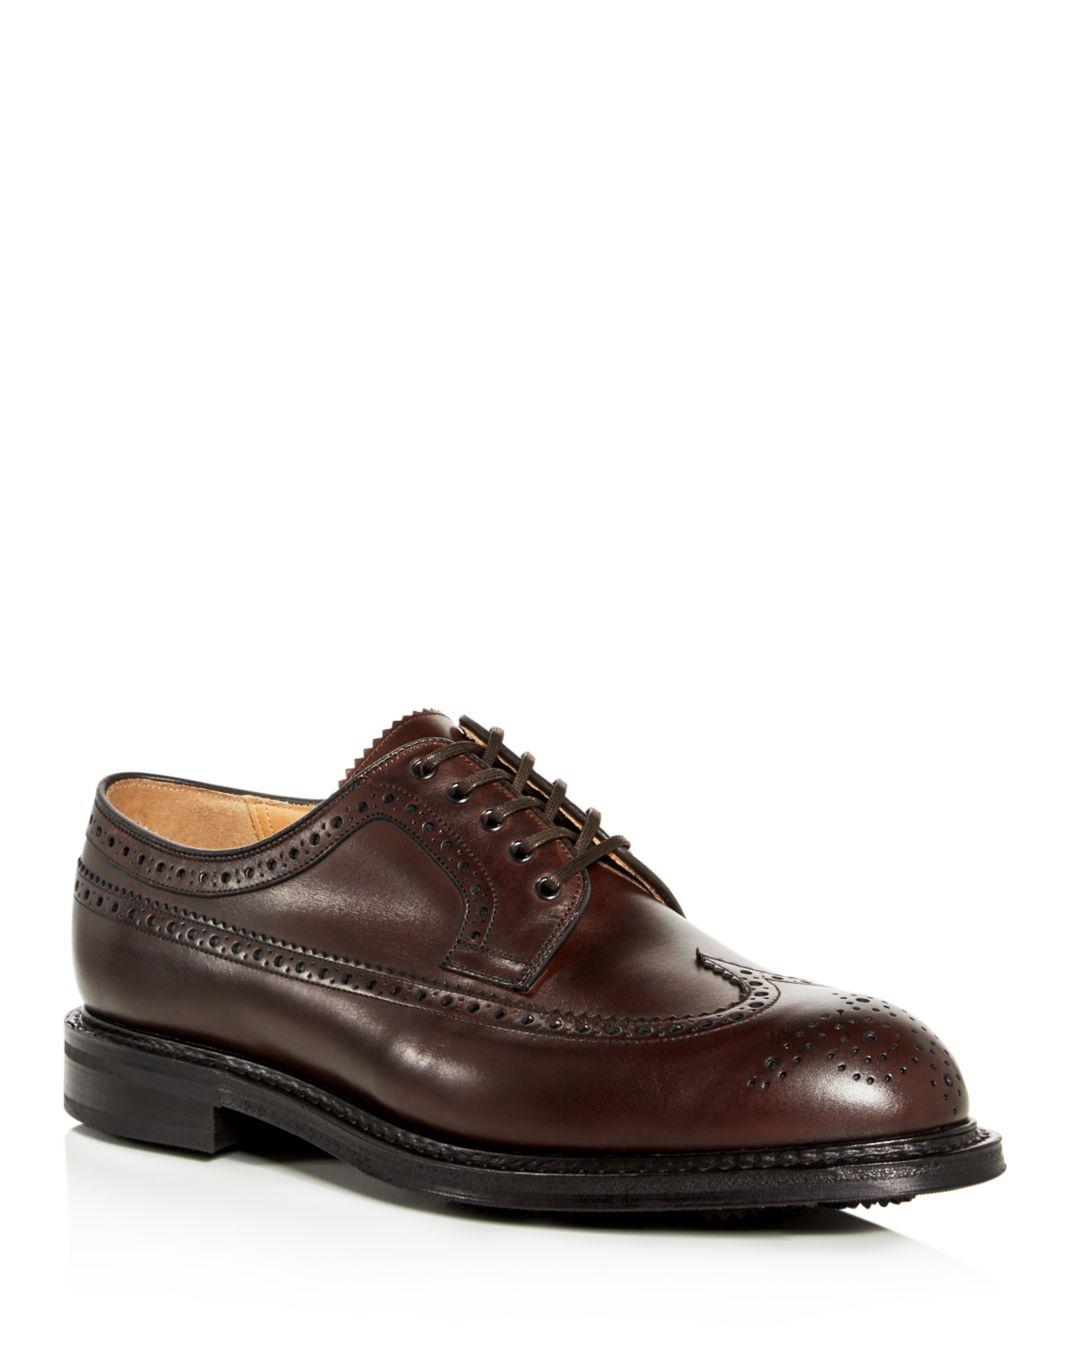 Church's Men's Swing Leather Wingtip Brogue Oxfords in Brown for Men - Lyst